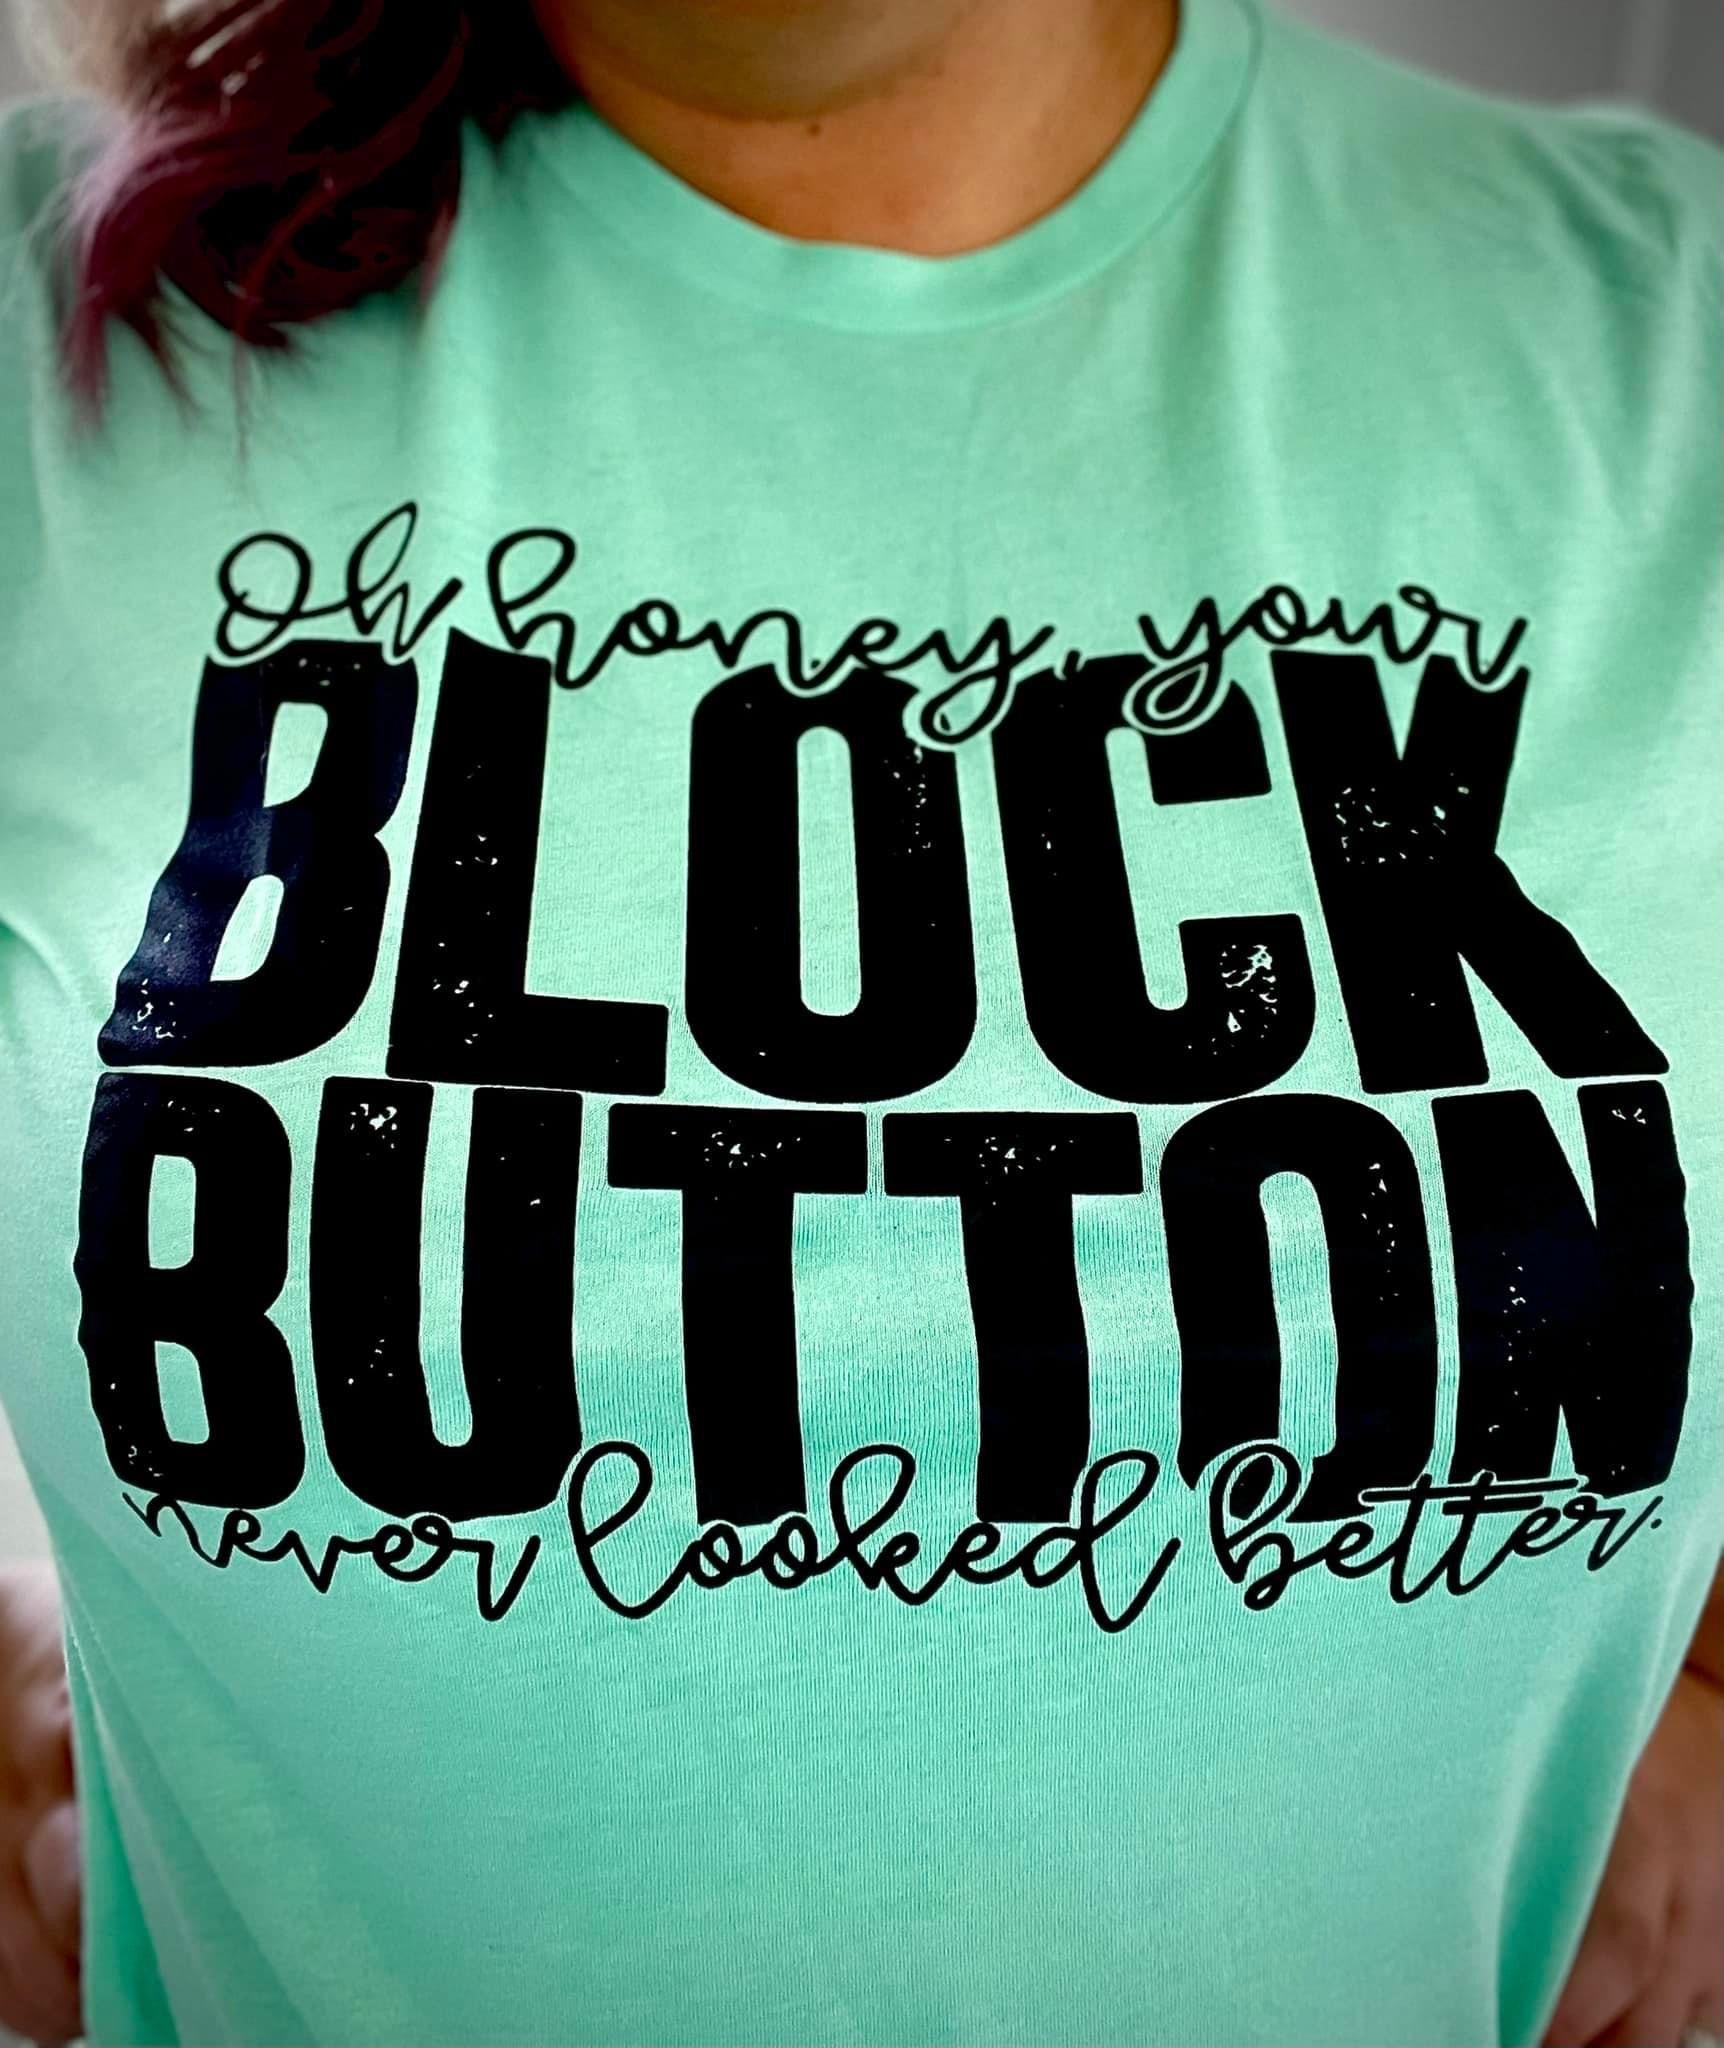 Oh Honey Your Block Button Never Looked So Good Screen Print Transfer Regular Heat